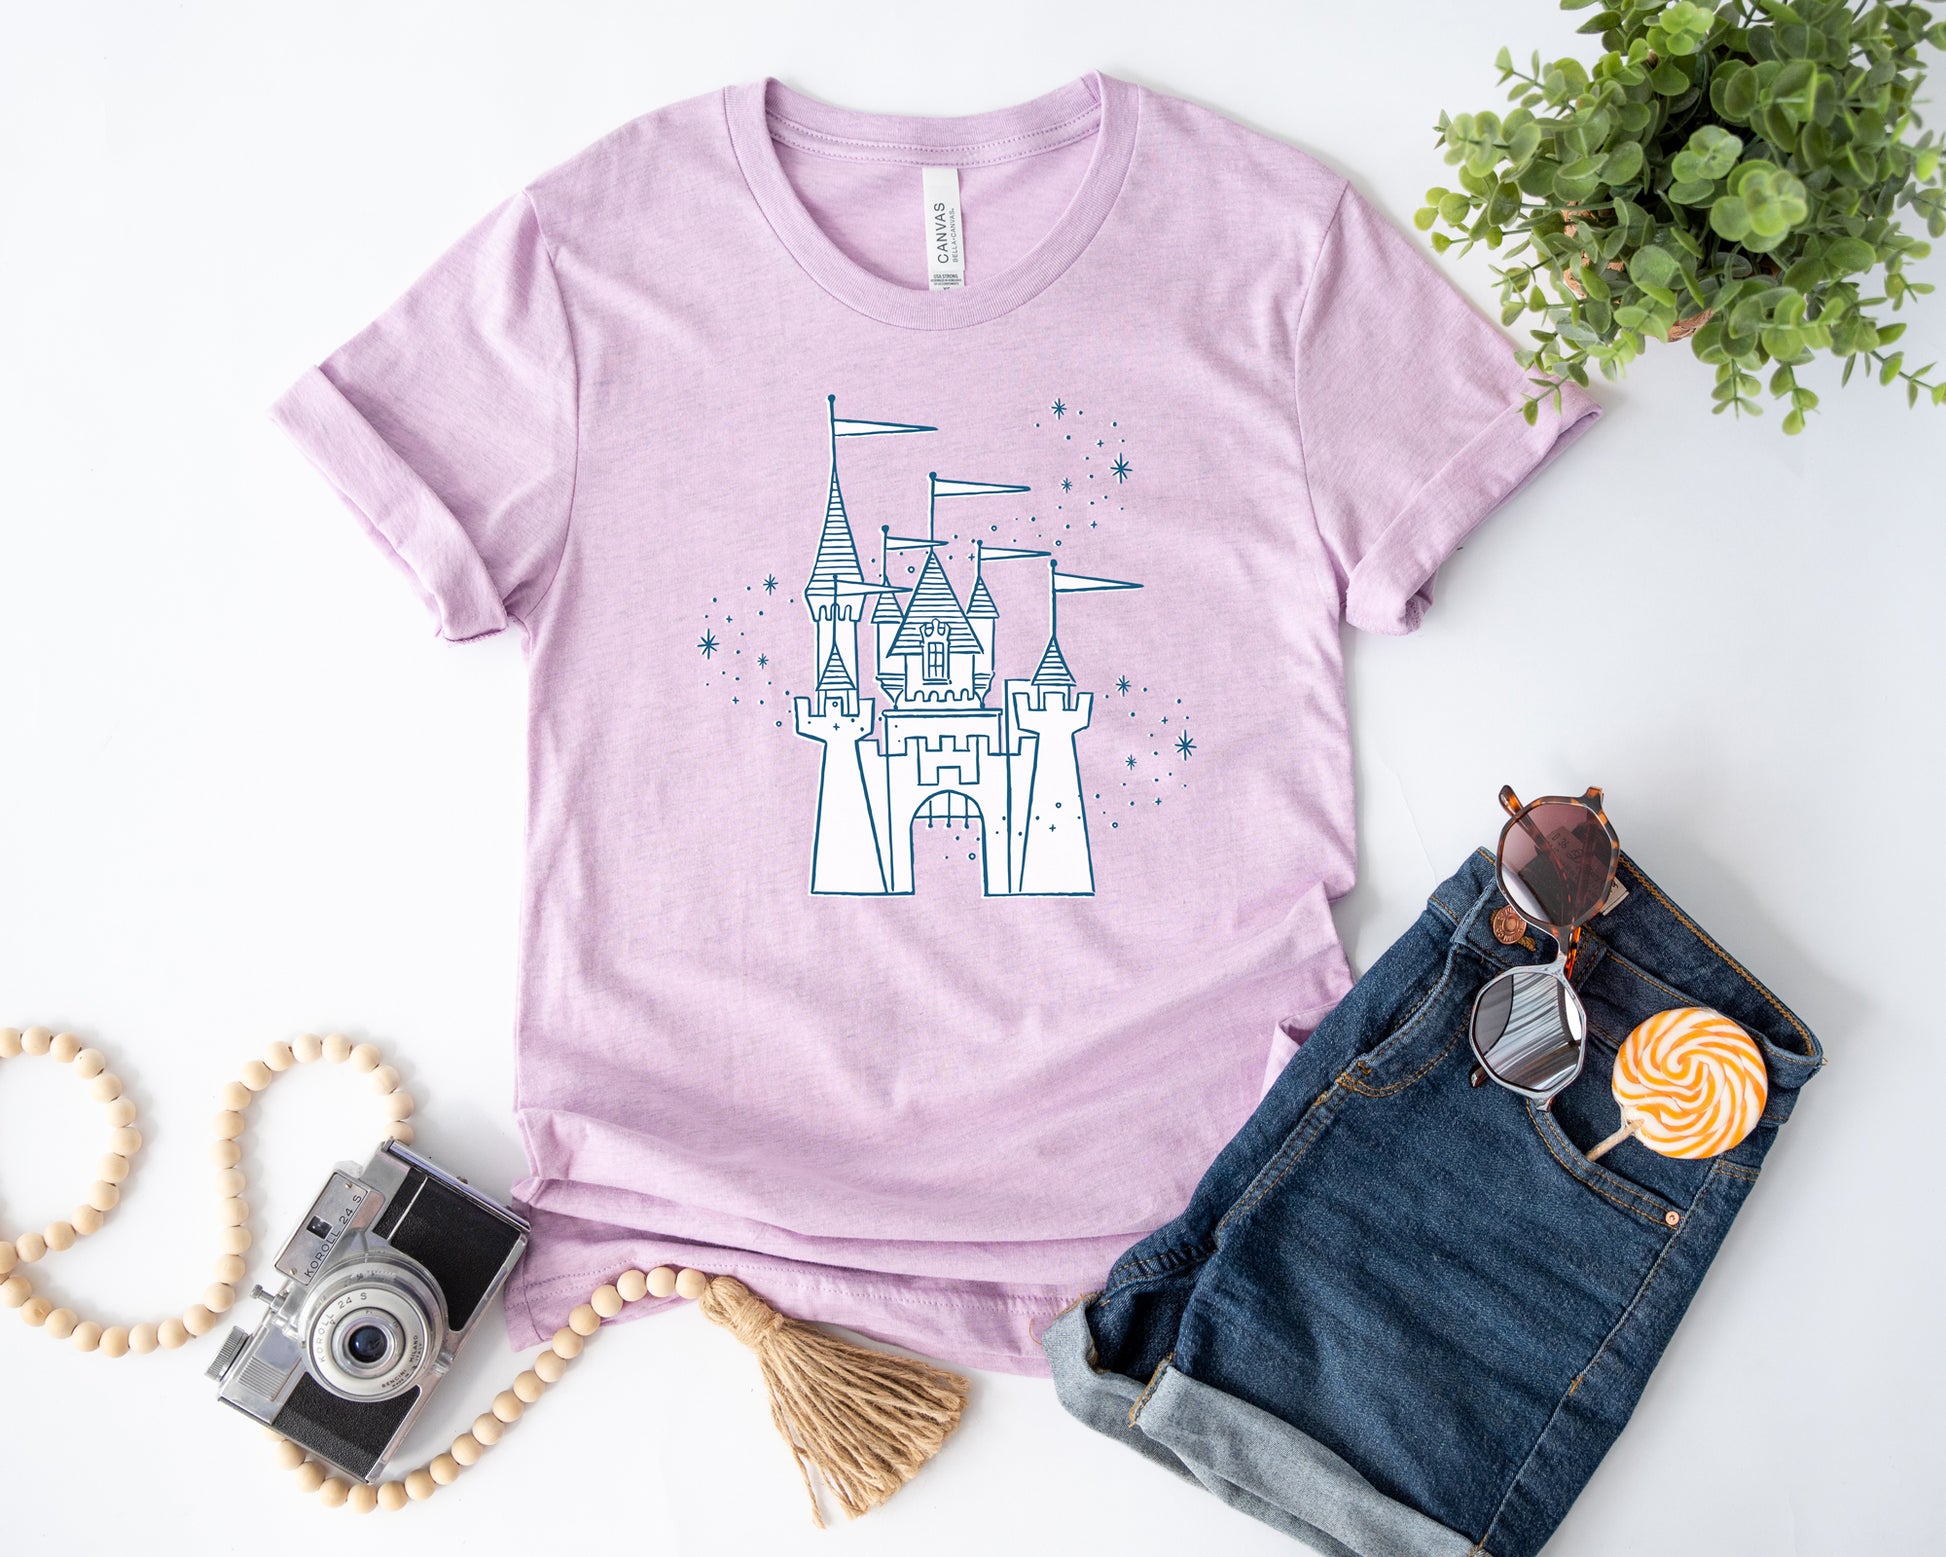 Flat lay of a purple shirt printed with vintage style sketch of the Disneyland Castle and pixie dust above the castle. The accessories next to the shirt are a camera, plant, shorts, sunglasses, and a lollipop.